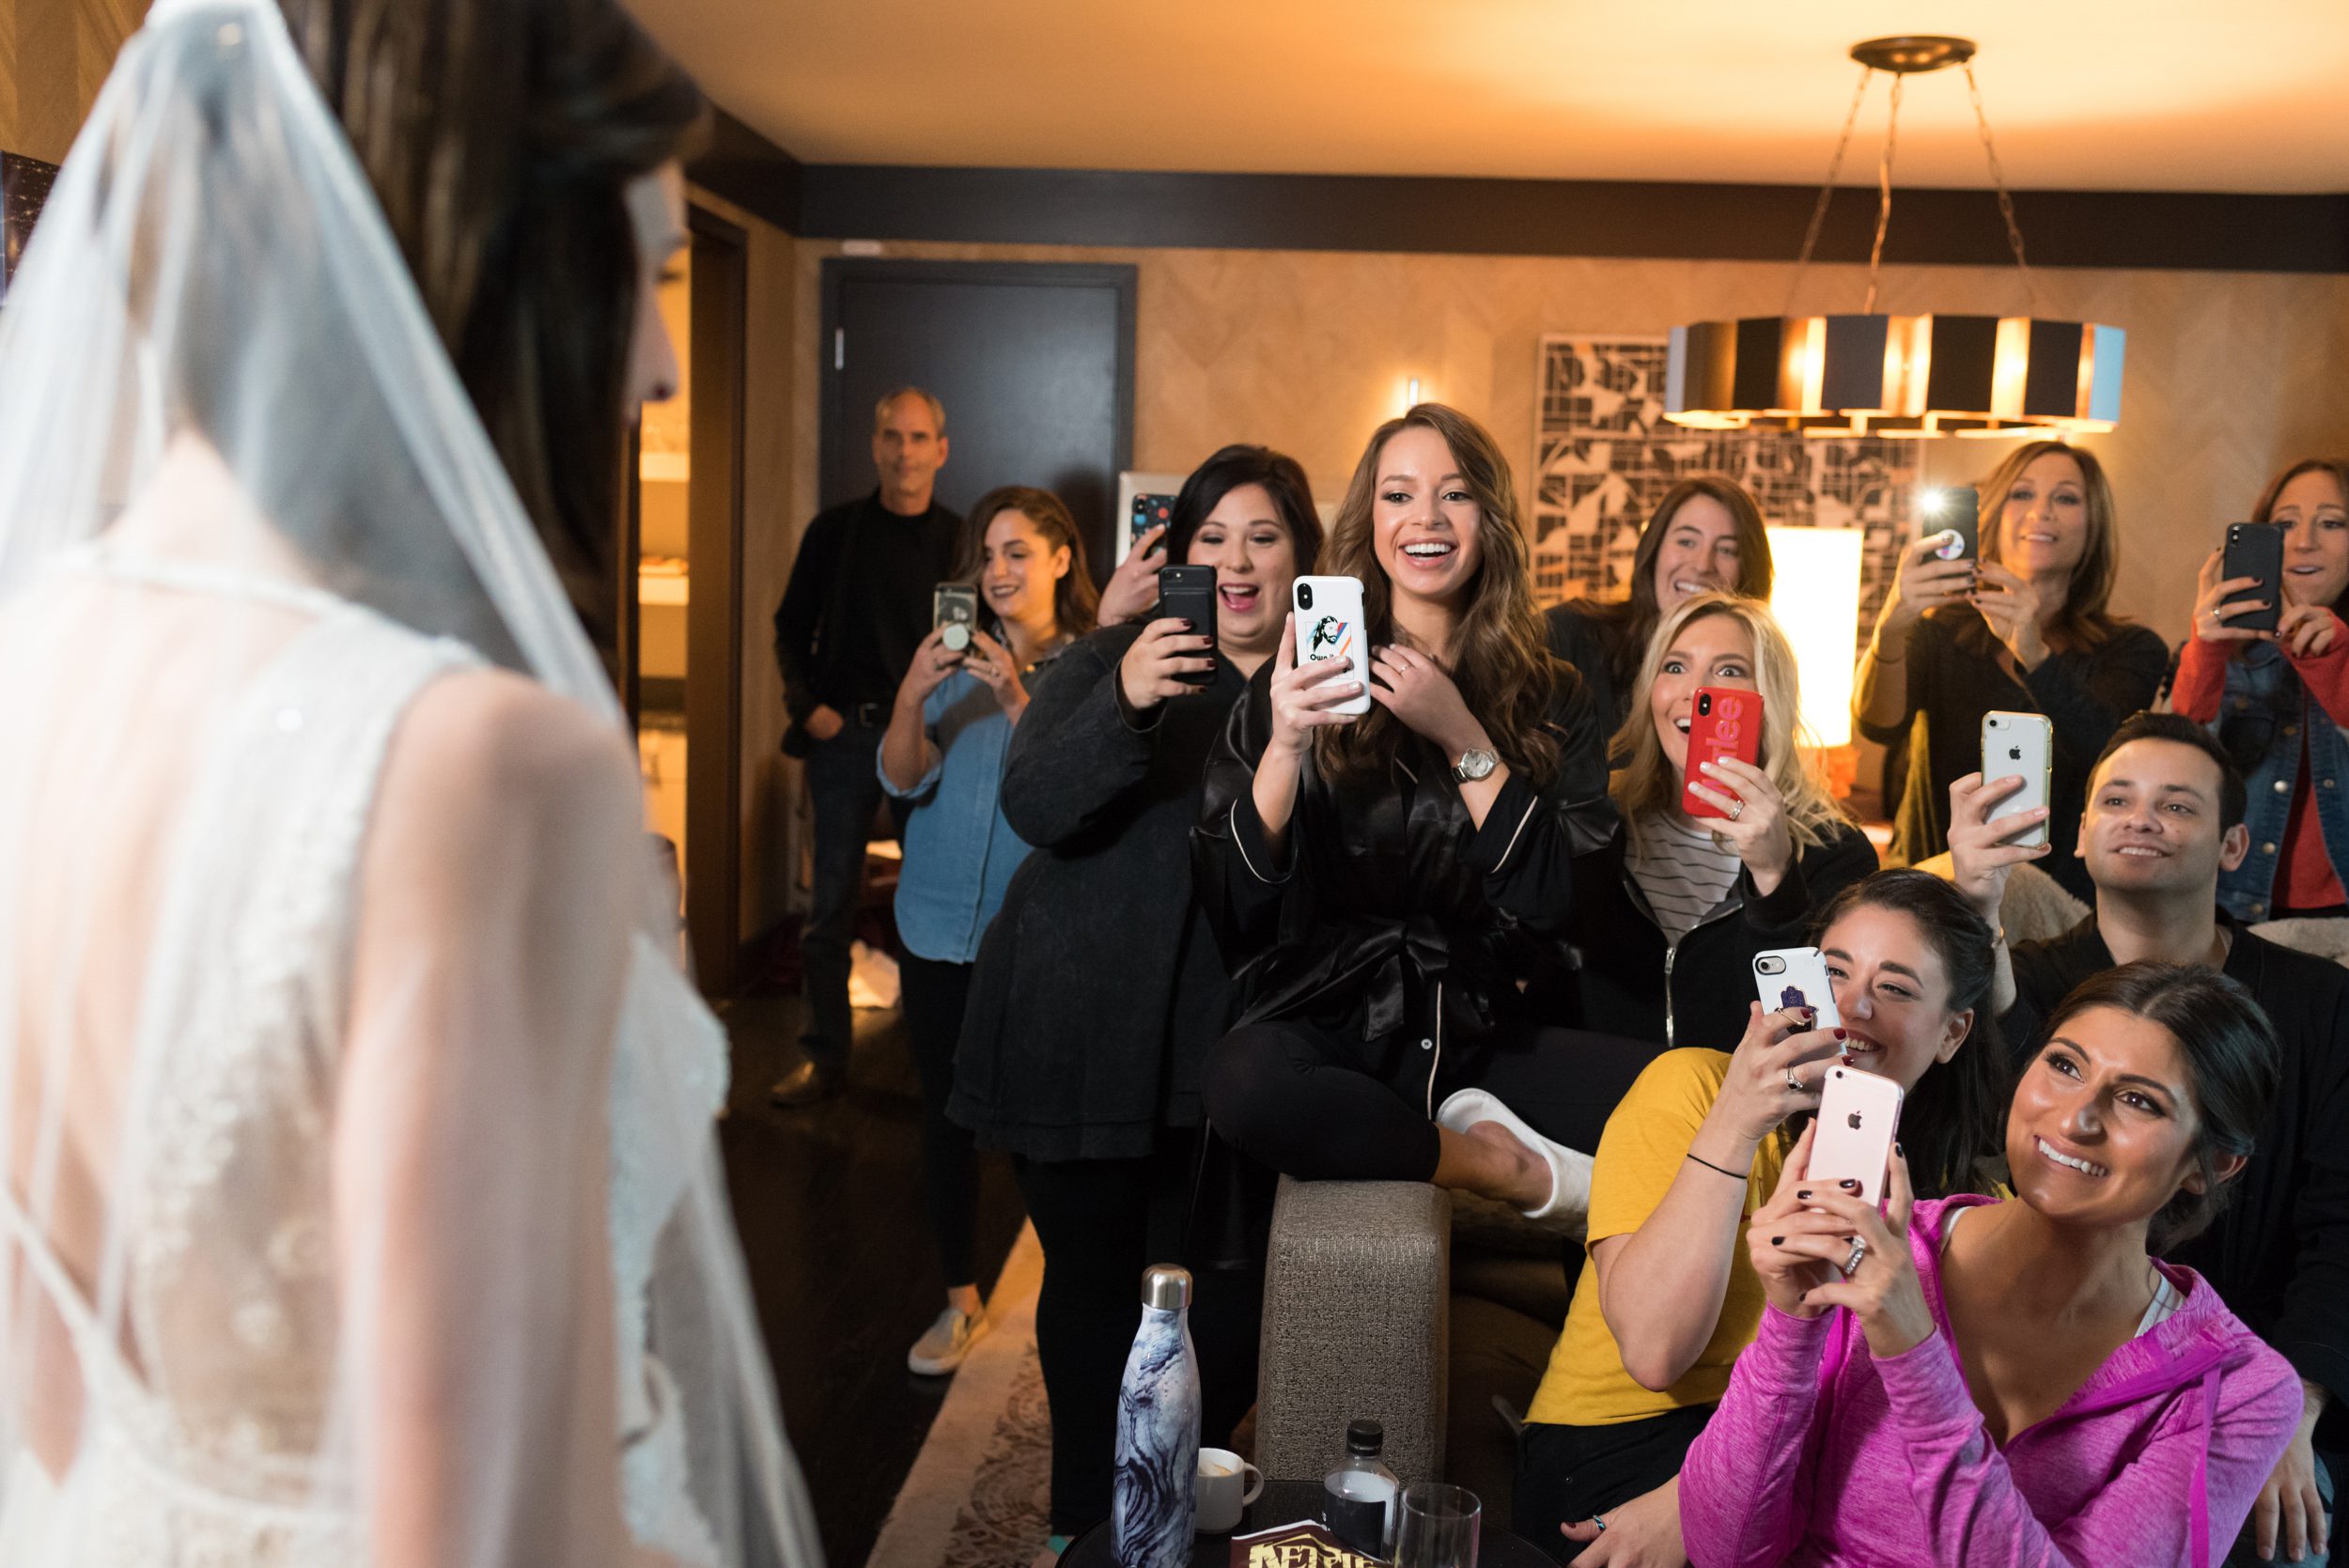 Wedding party and supportive family photographing bride Elana with wave of iphones. Photographed by Candice Cusic